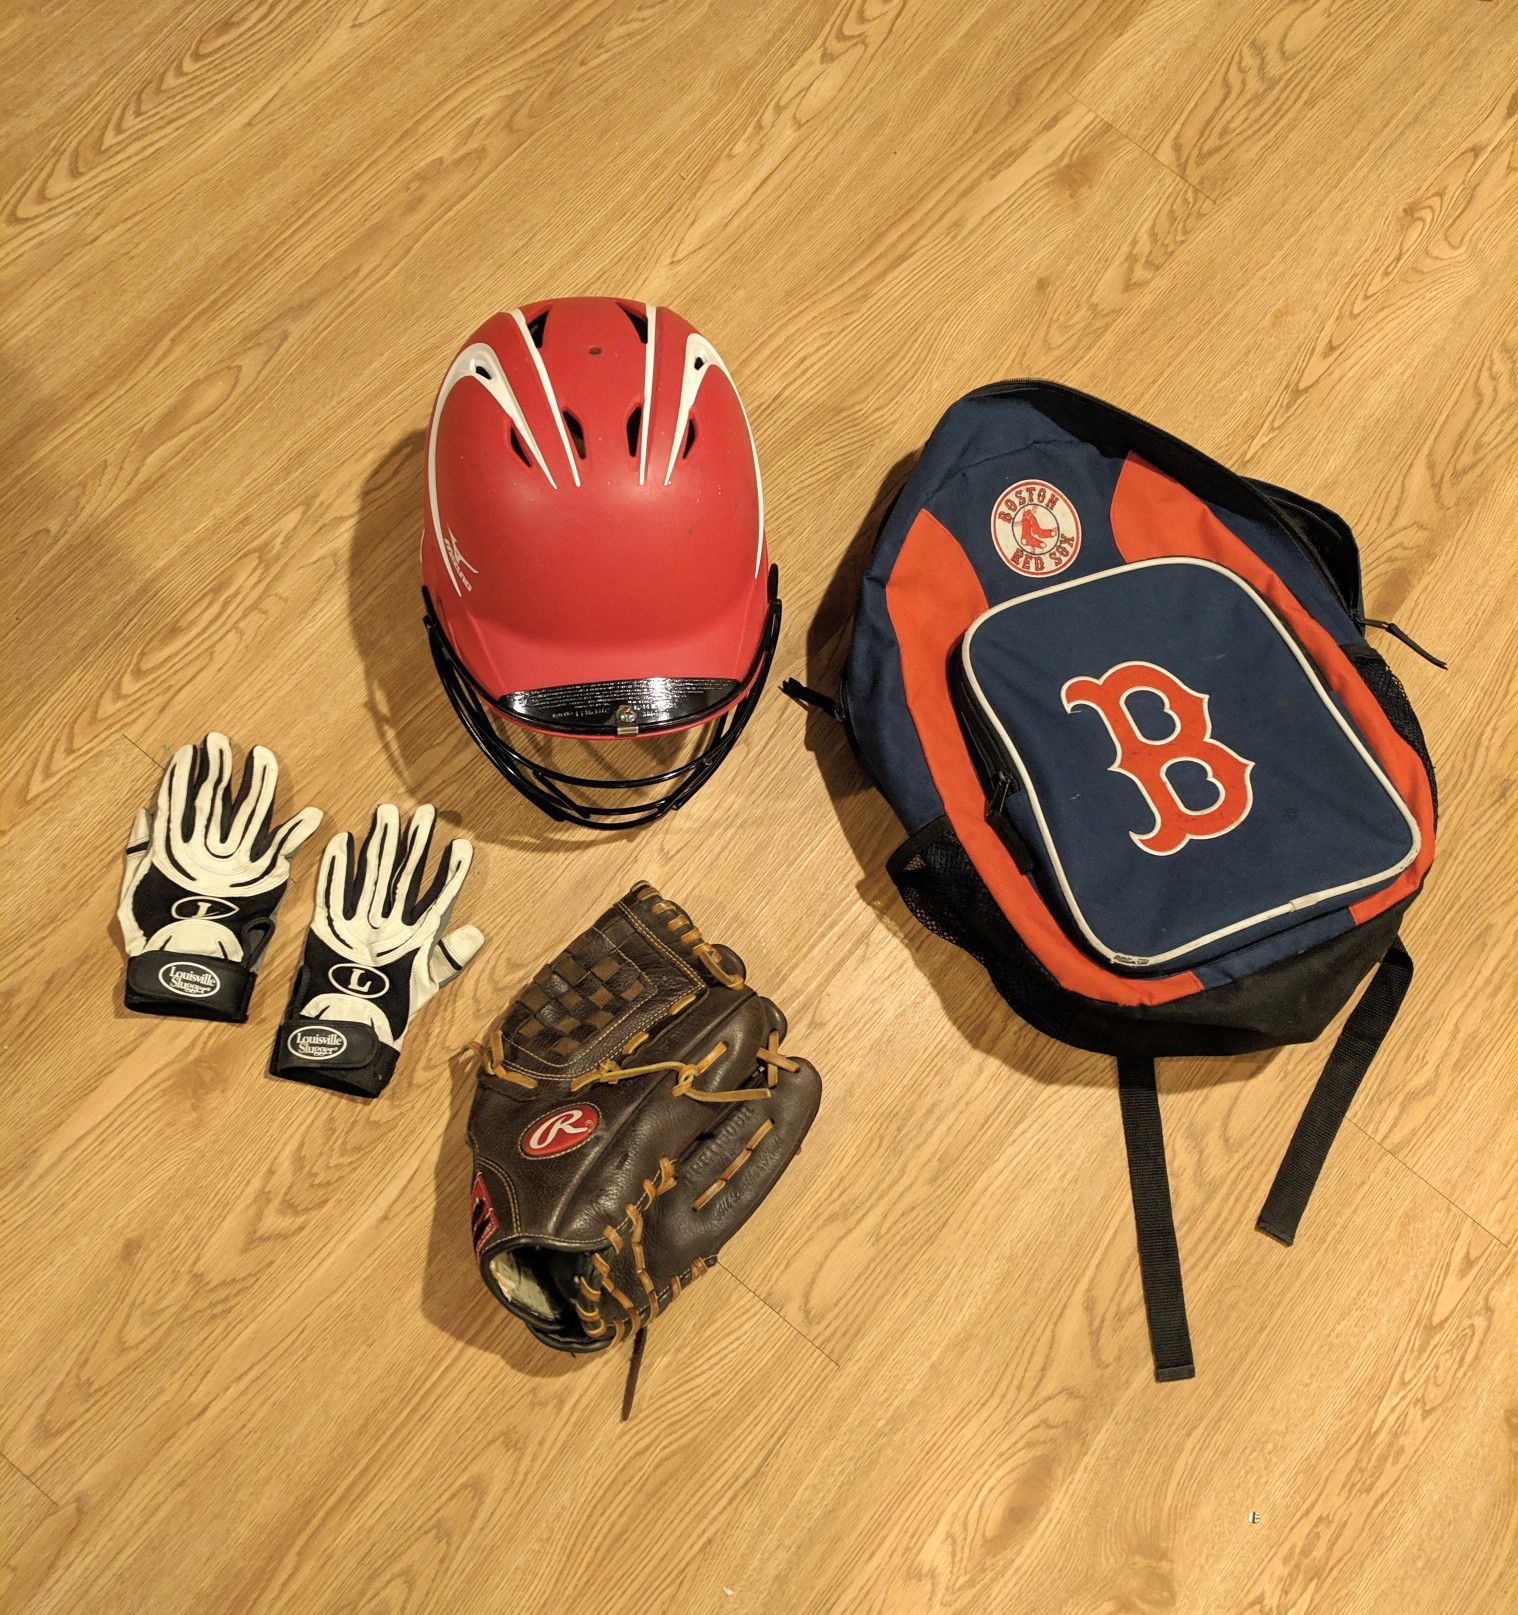 Baseball gear. Mizuno batters helmet with cage. Rawlings glove. Two batting gloves. Free red sox bag.